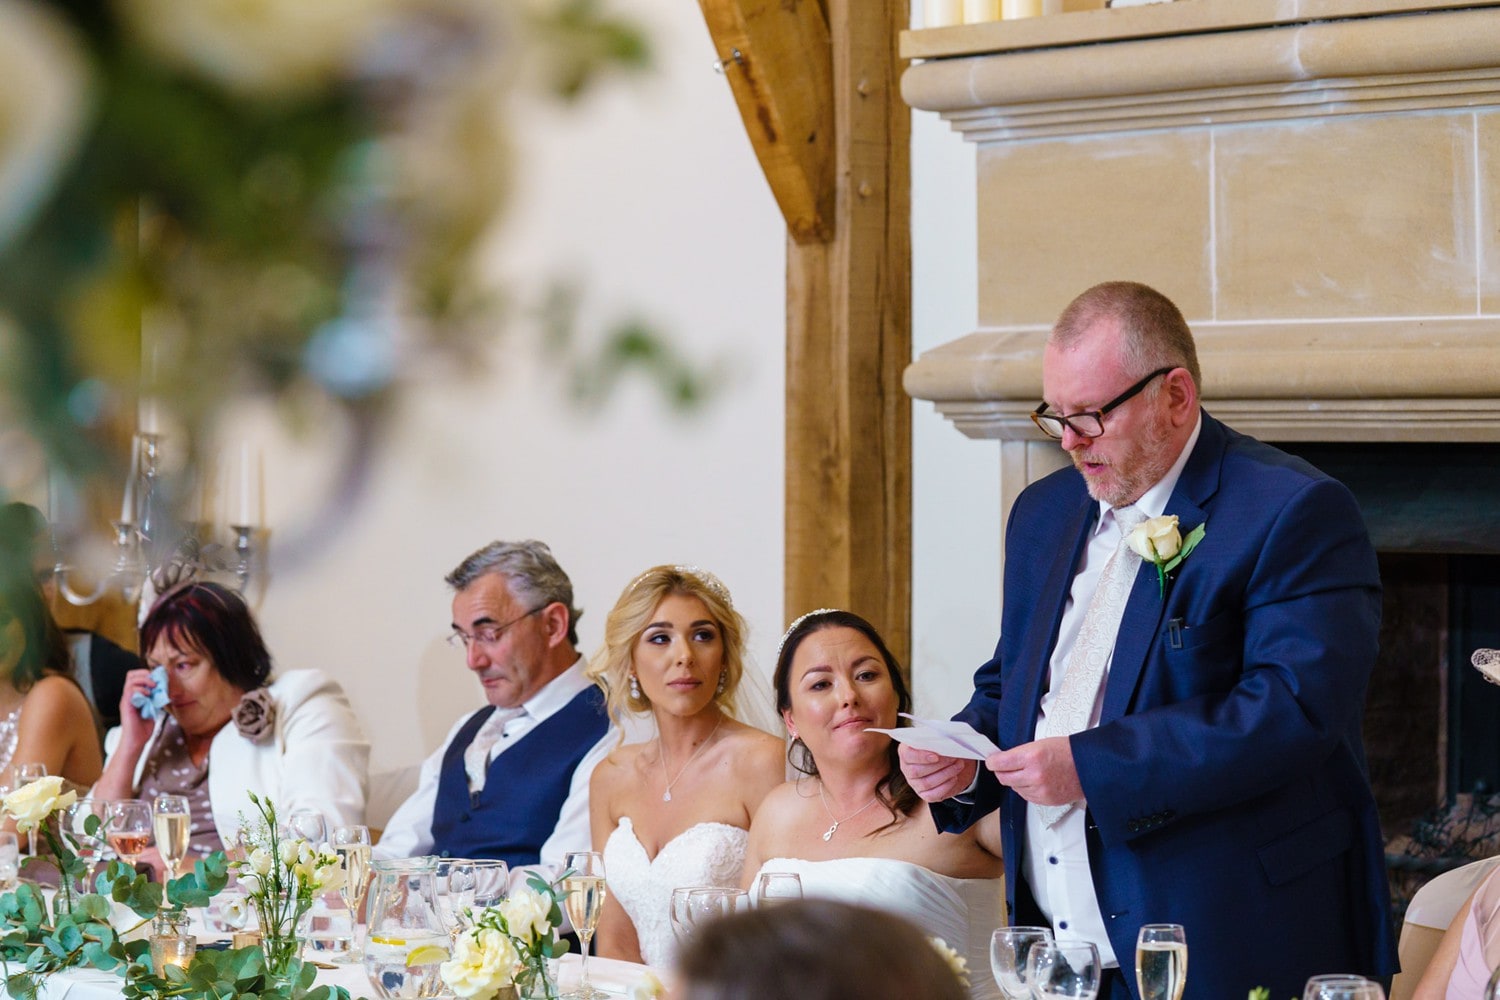 Father of the bride speech during wedding breakfast at Swancar Farm in Nottinghamshire